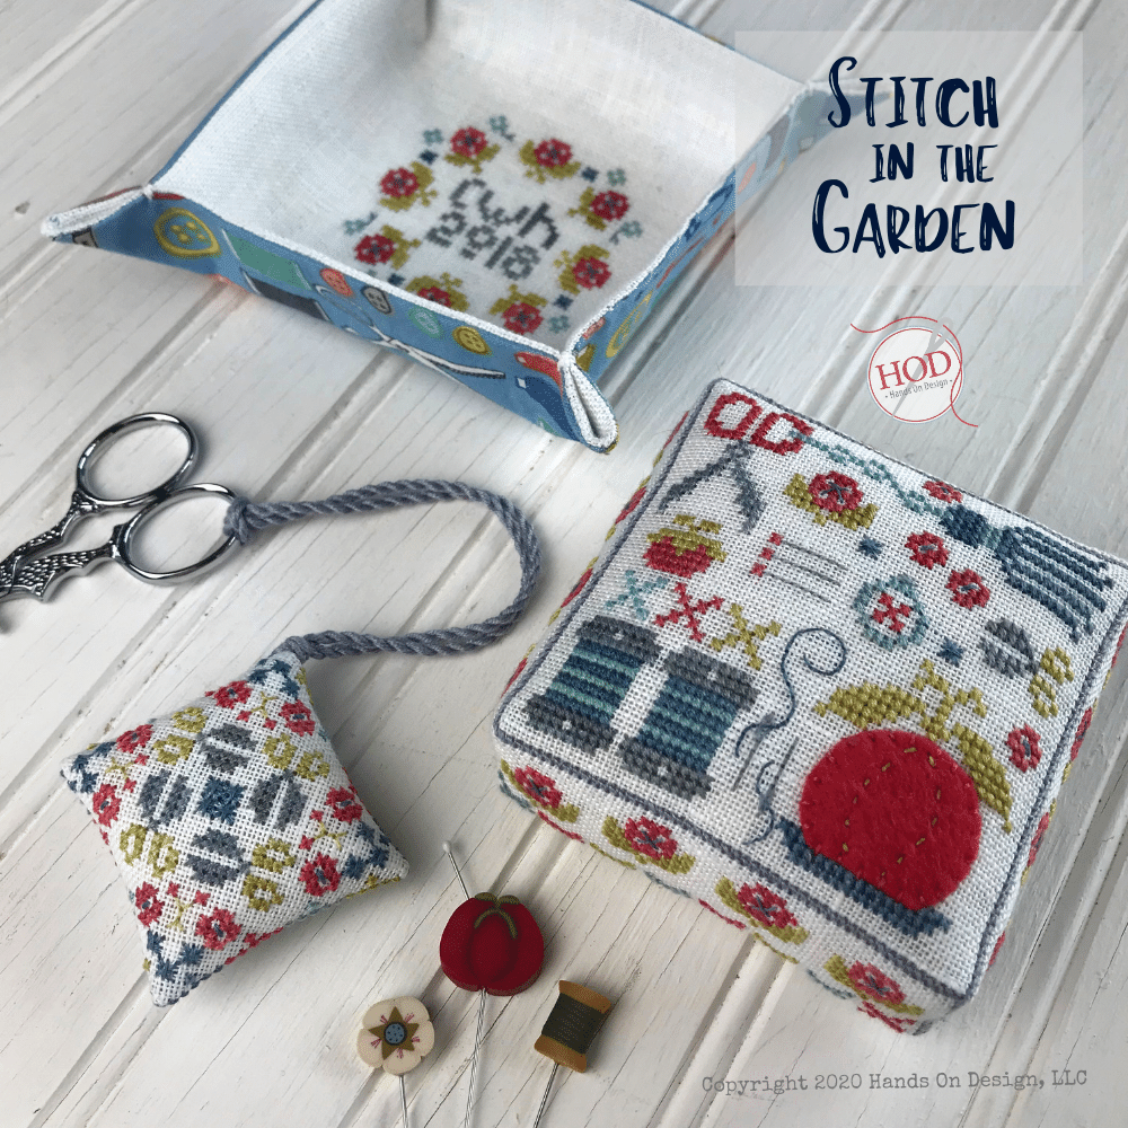 STITCH in the GARDEN Cross Stitch Pincushion, Fob & Tray Kit from Hands On Design: Pattern, Linen, Floss and JABC Pins & Embroidery Scissors